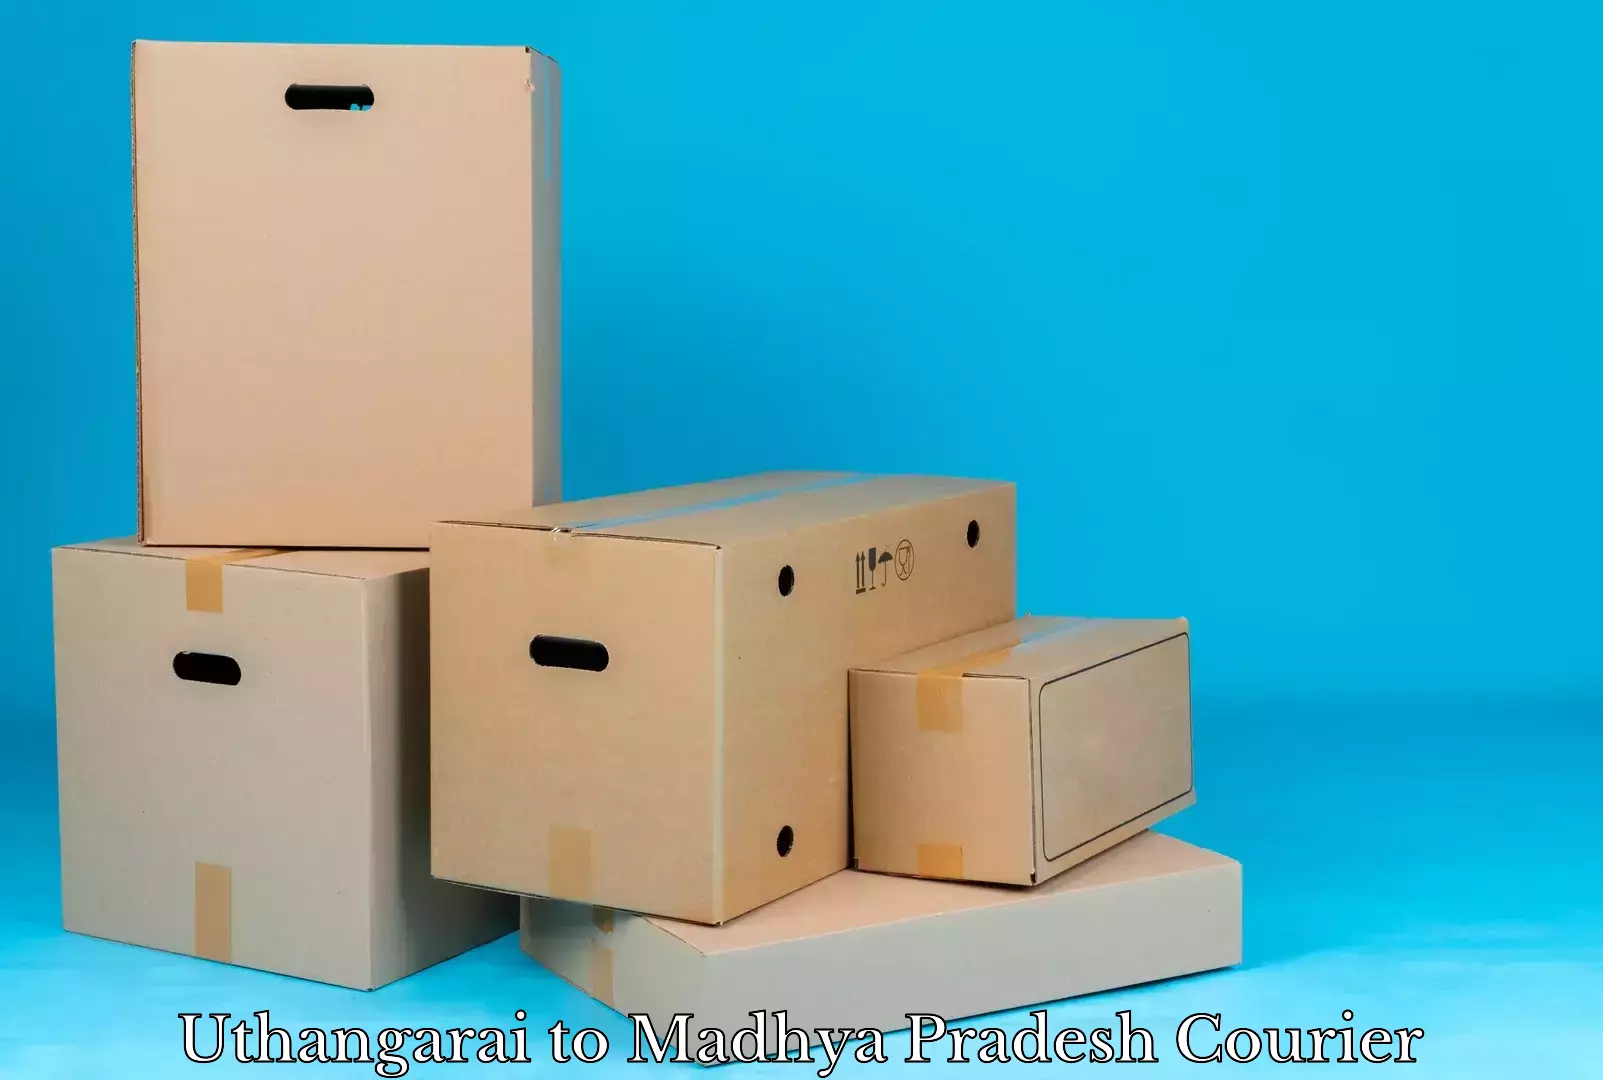 Quality relocation services in Uthangarai to Chhindwara